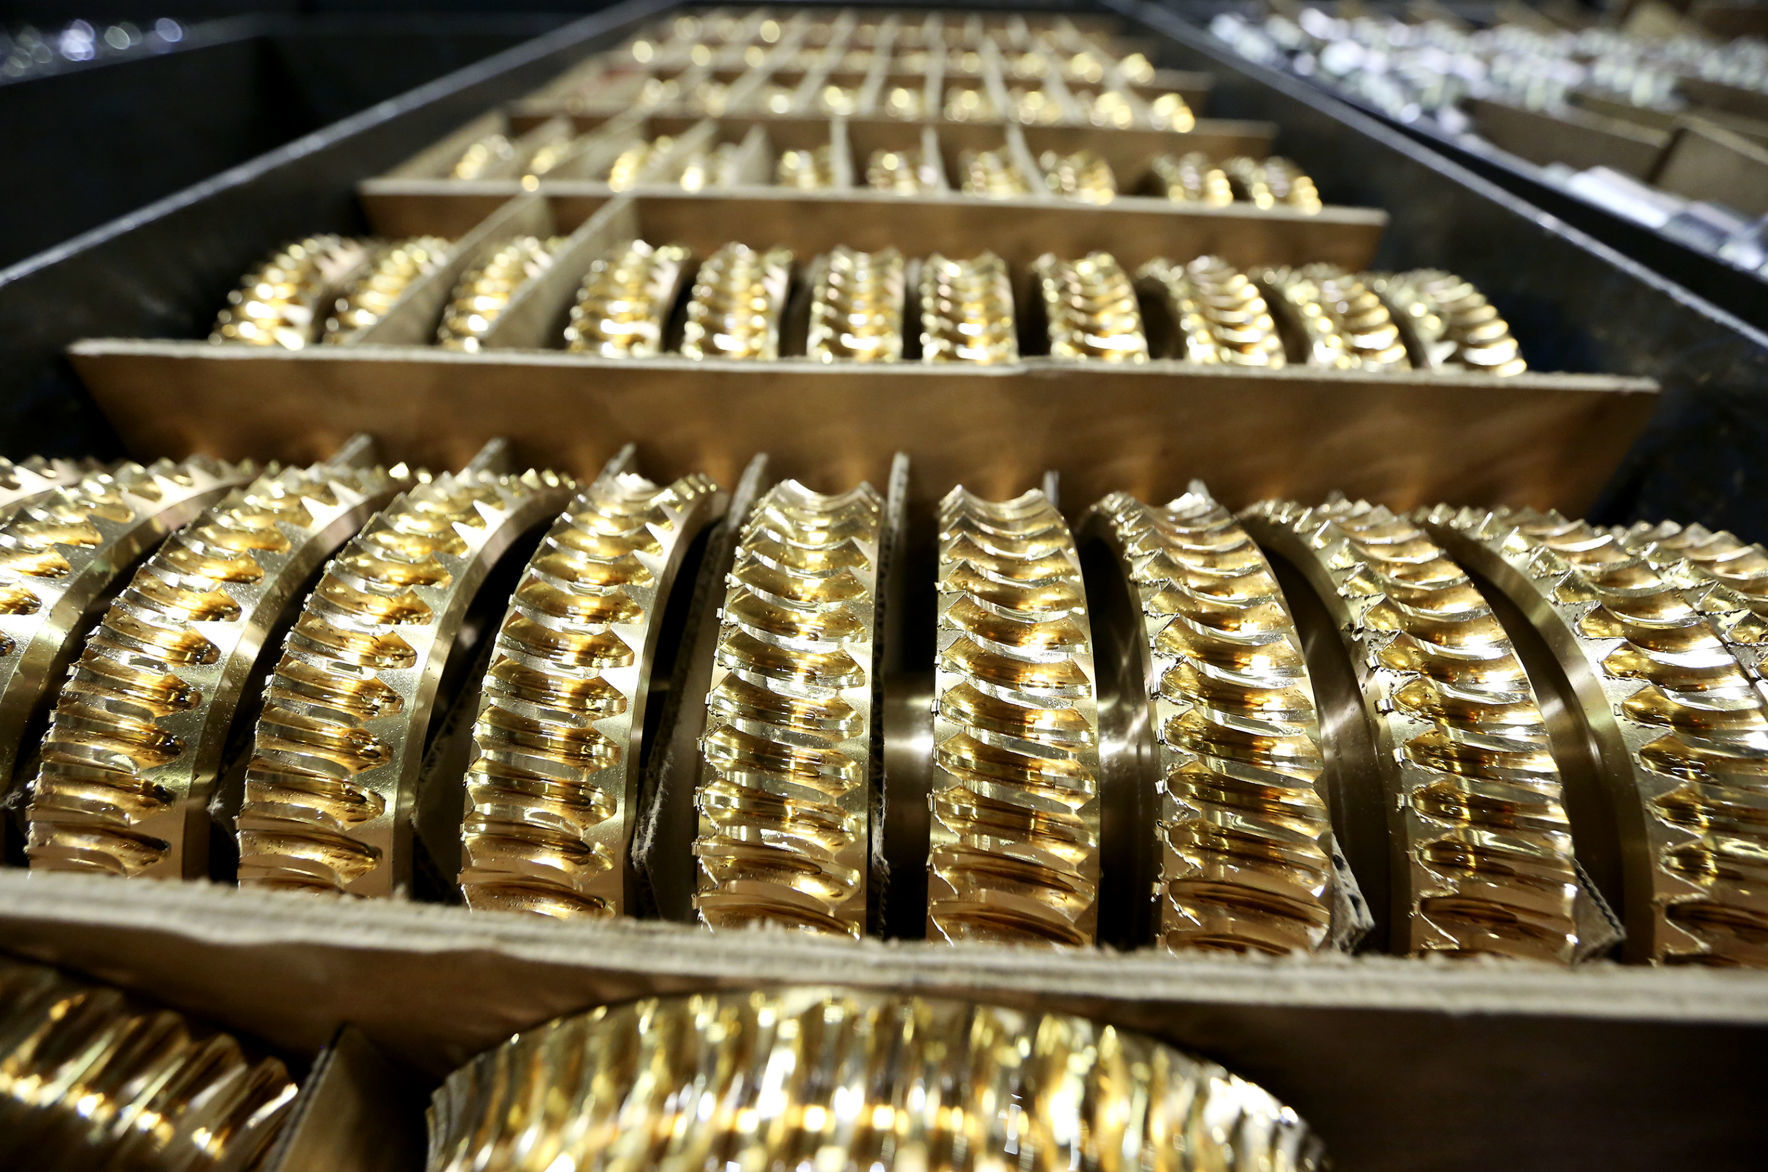 Helical gears manufactured at The Adams Company in Dubuque.    PHOTO CREDIT: Nicki Kohl
Telegraph Herald